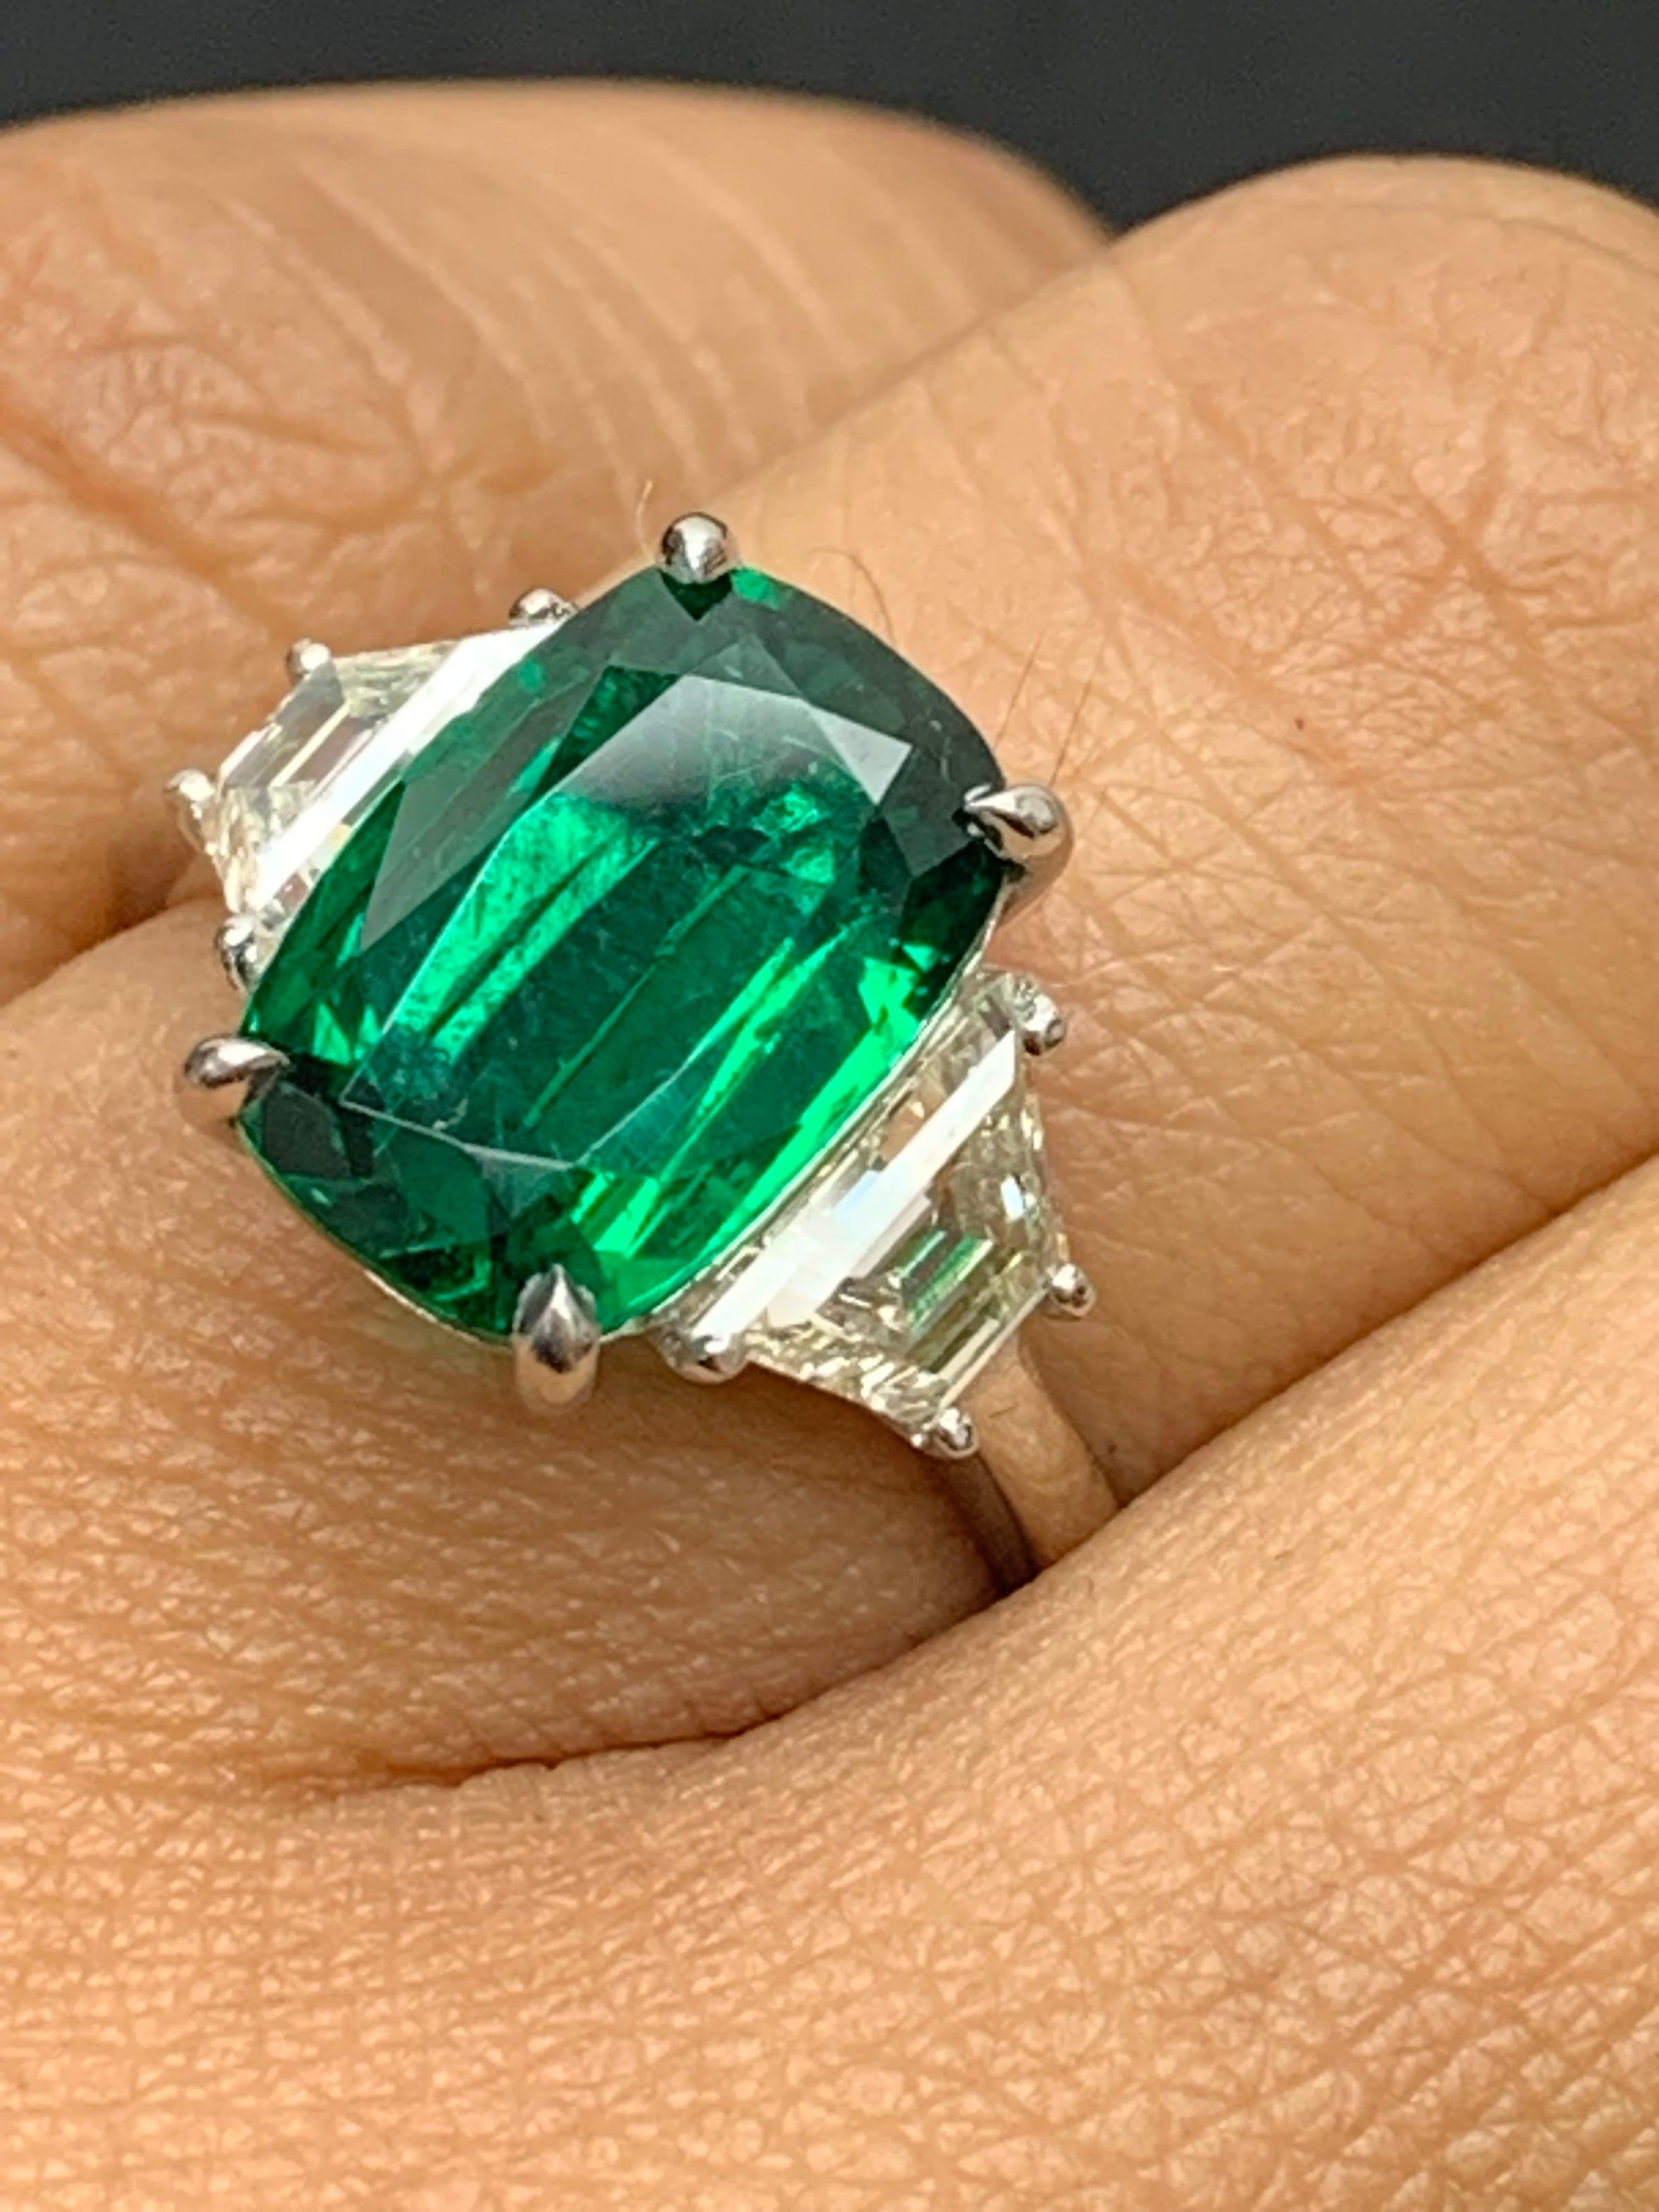 Showcases an elongated Cushion cut, Vibrant color Emerald weighing 2.91 carats, flanked by two brilliant cut trapezoid diamonds weighing 1.05 carats total. Elegantly set in a polished platinum composition.